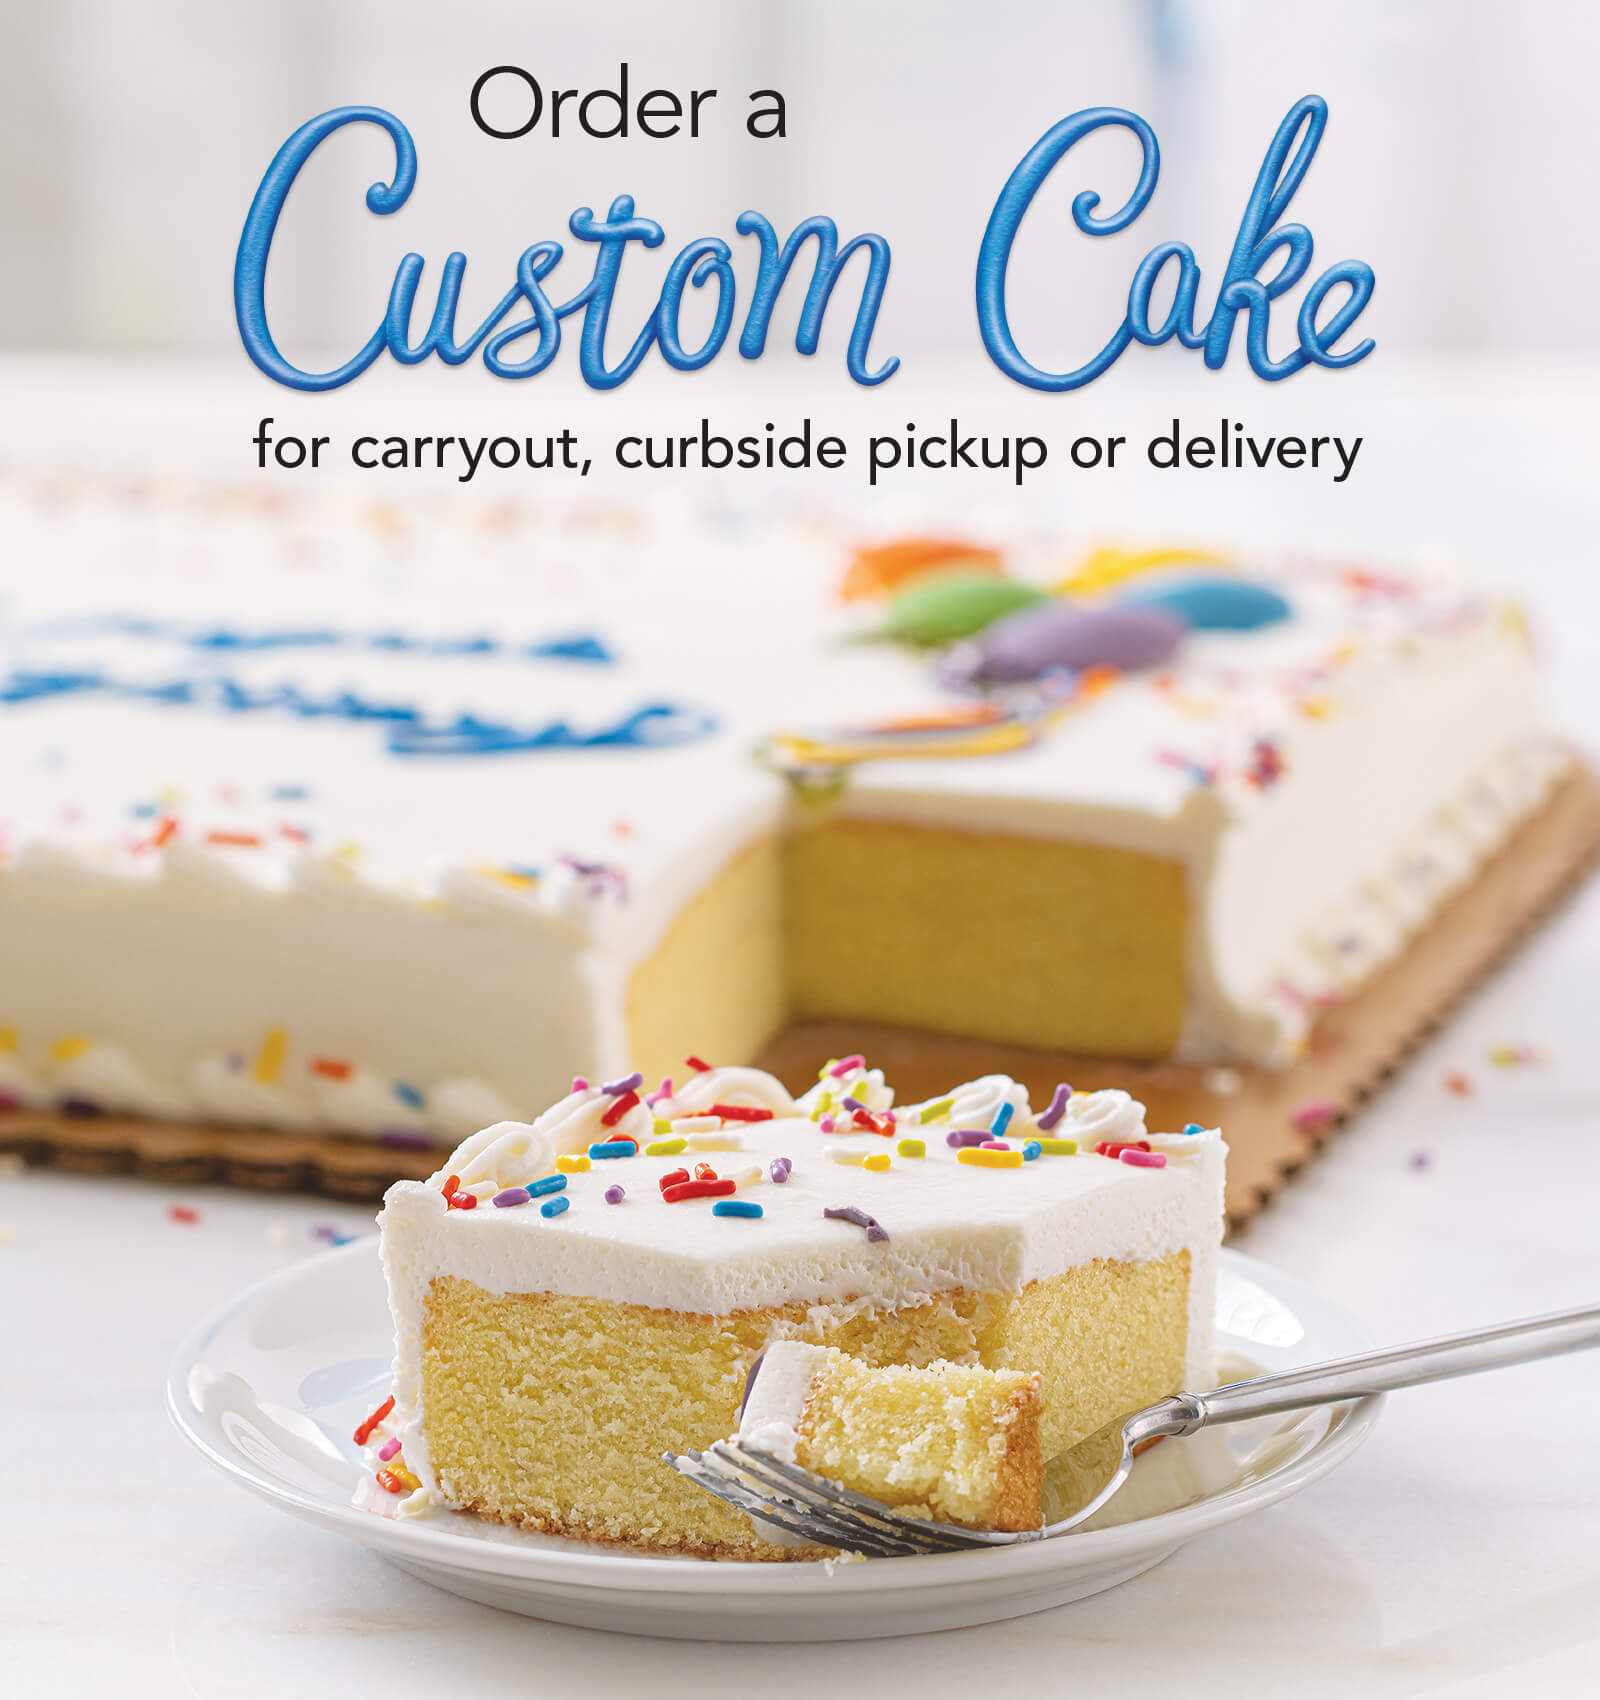 Order a custom cake for carryout, curbside pickup or delivery